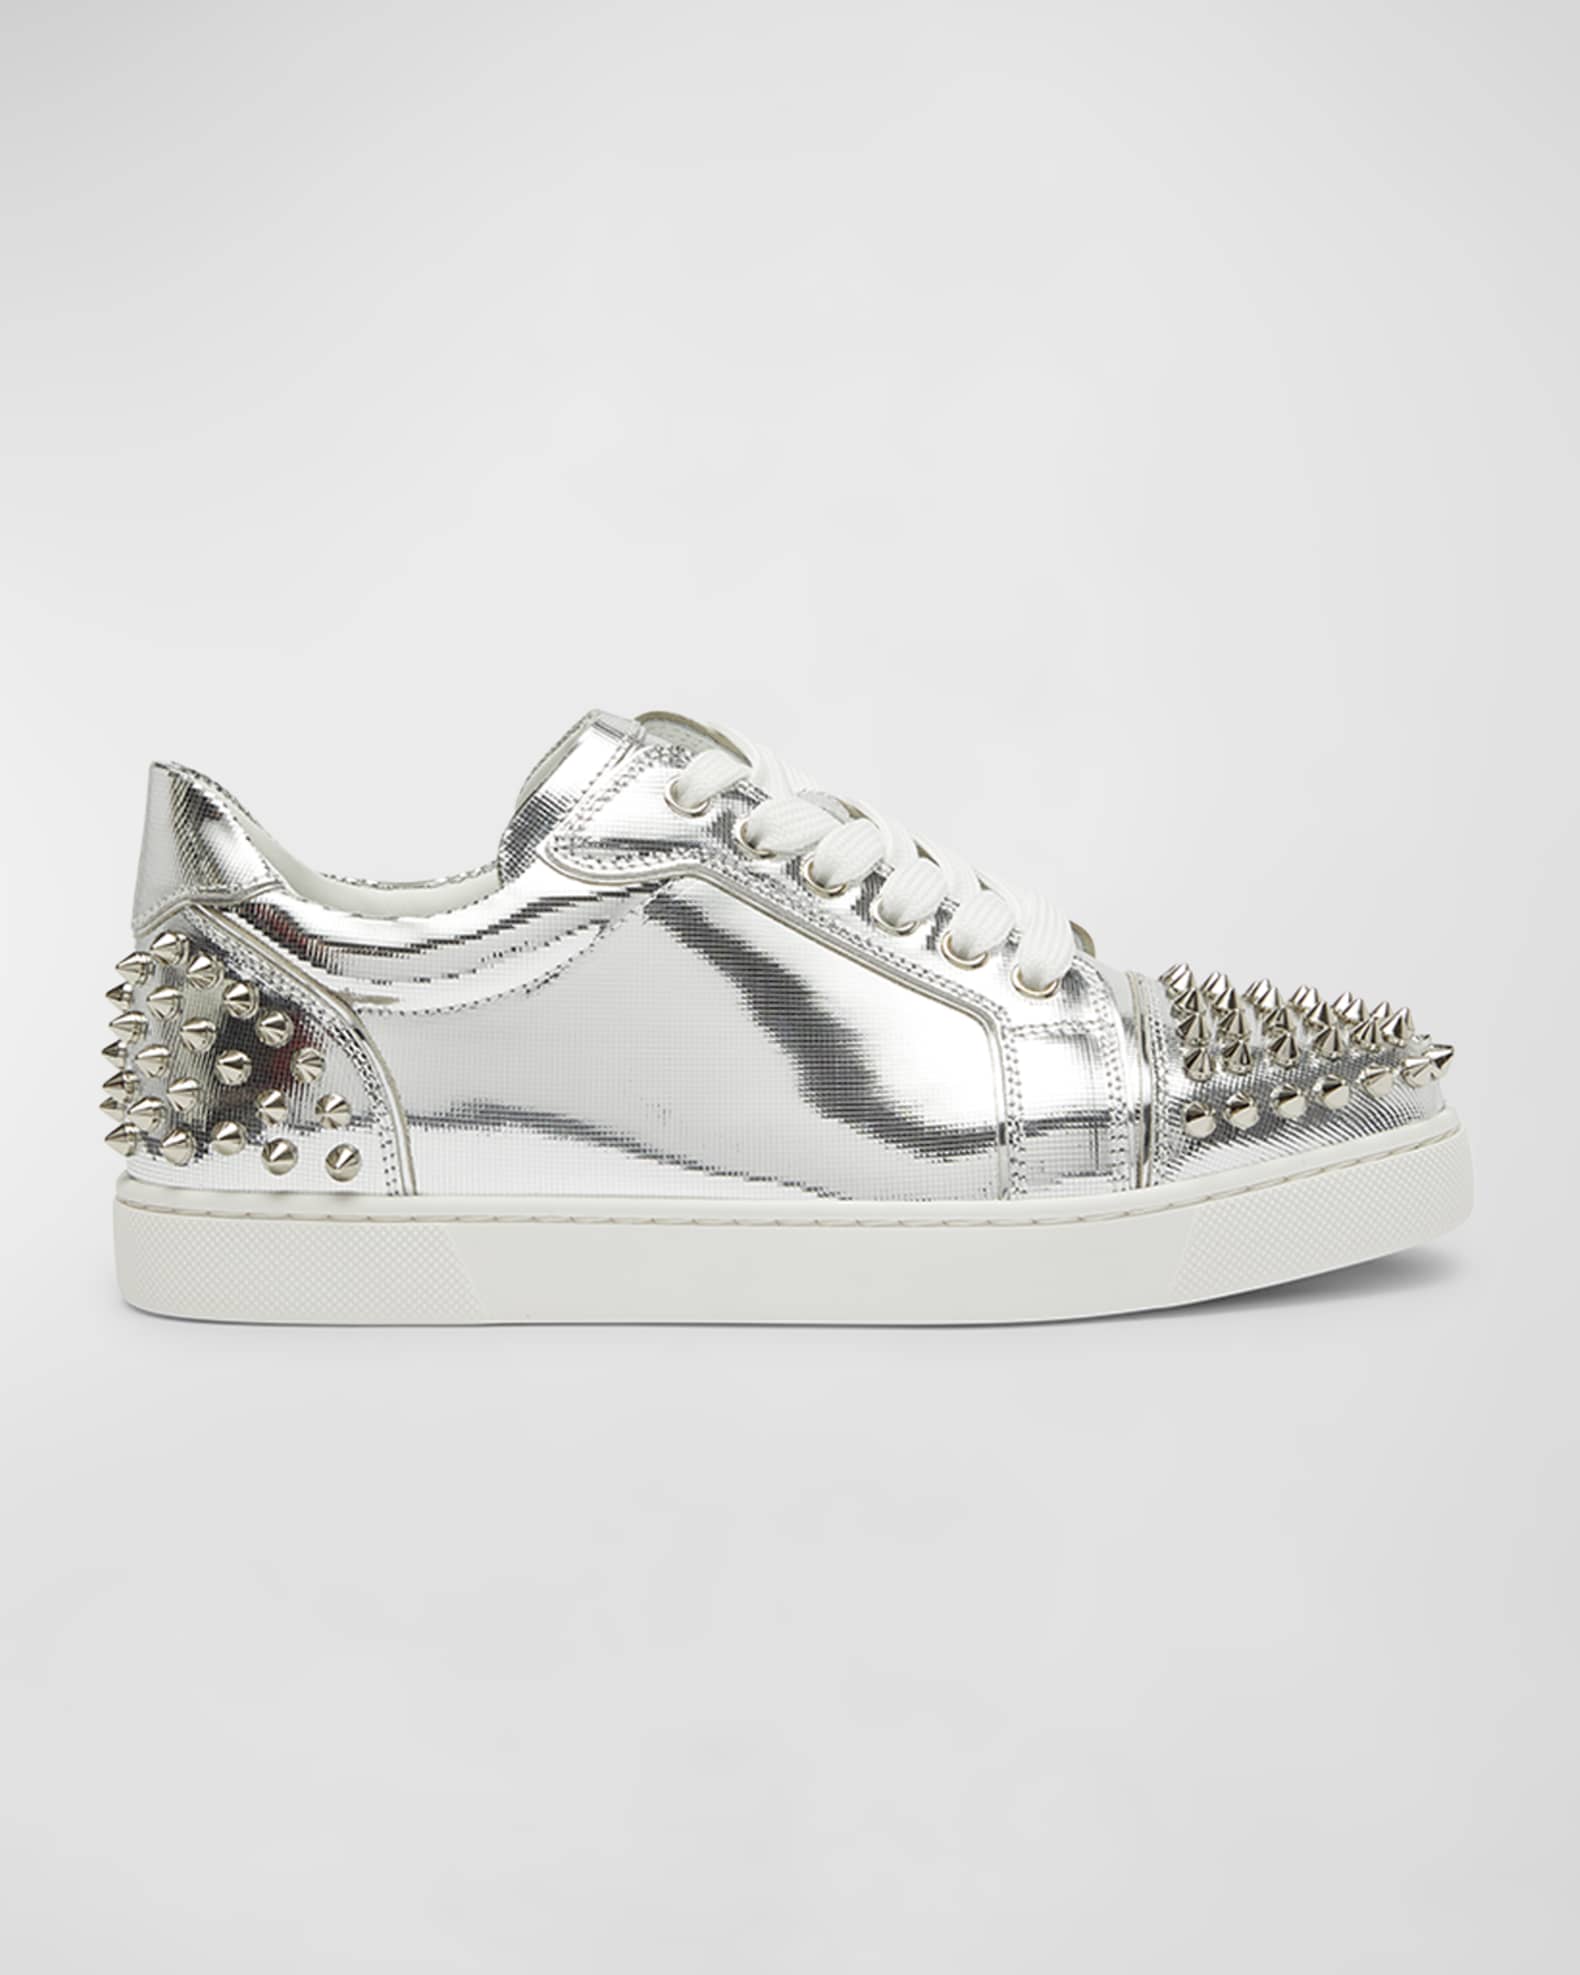 Christian Louboutin Vieira glitter sneakers with studs